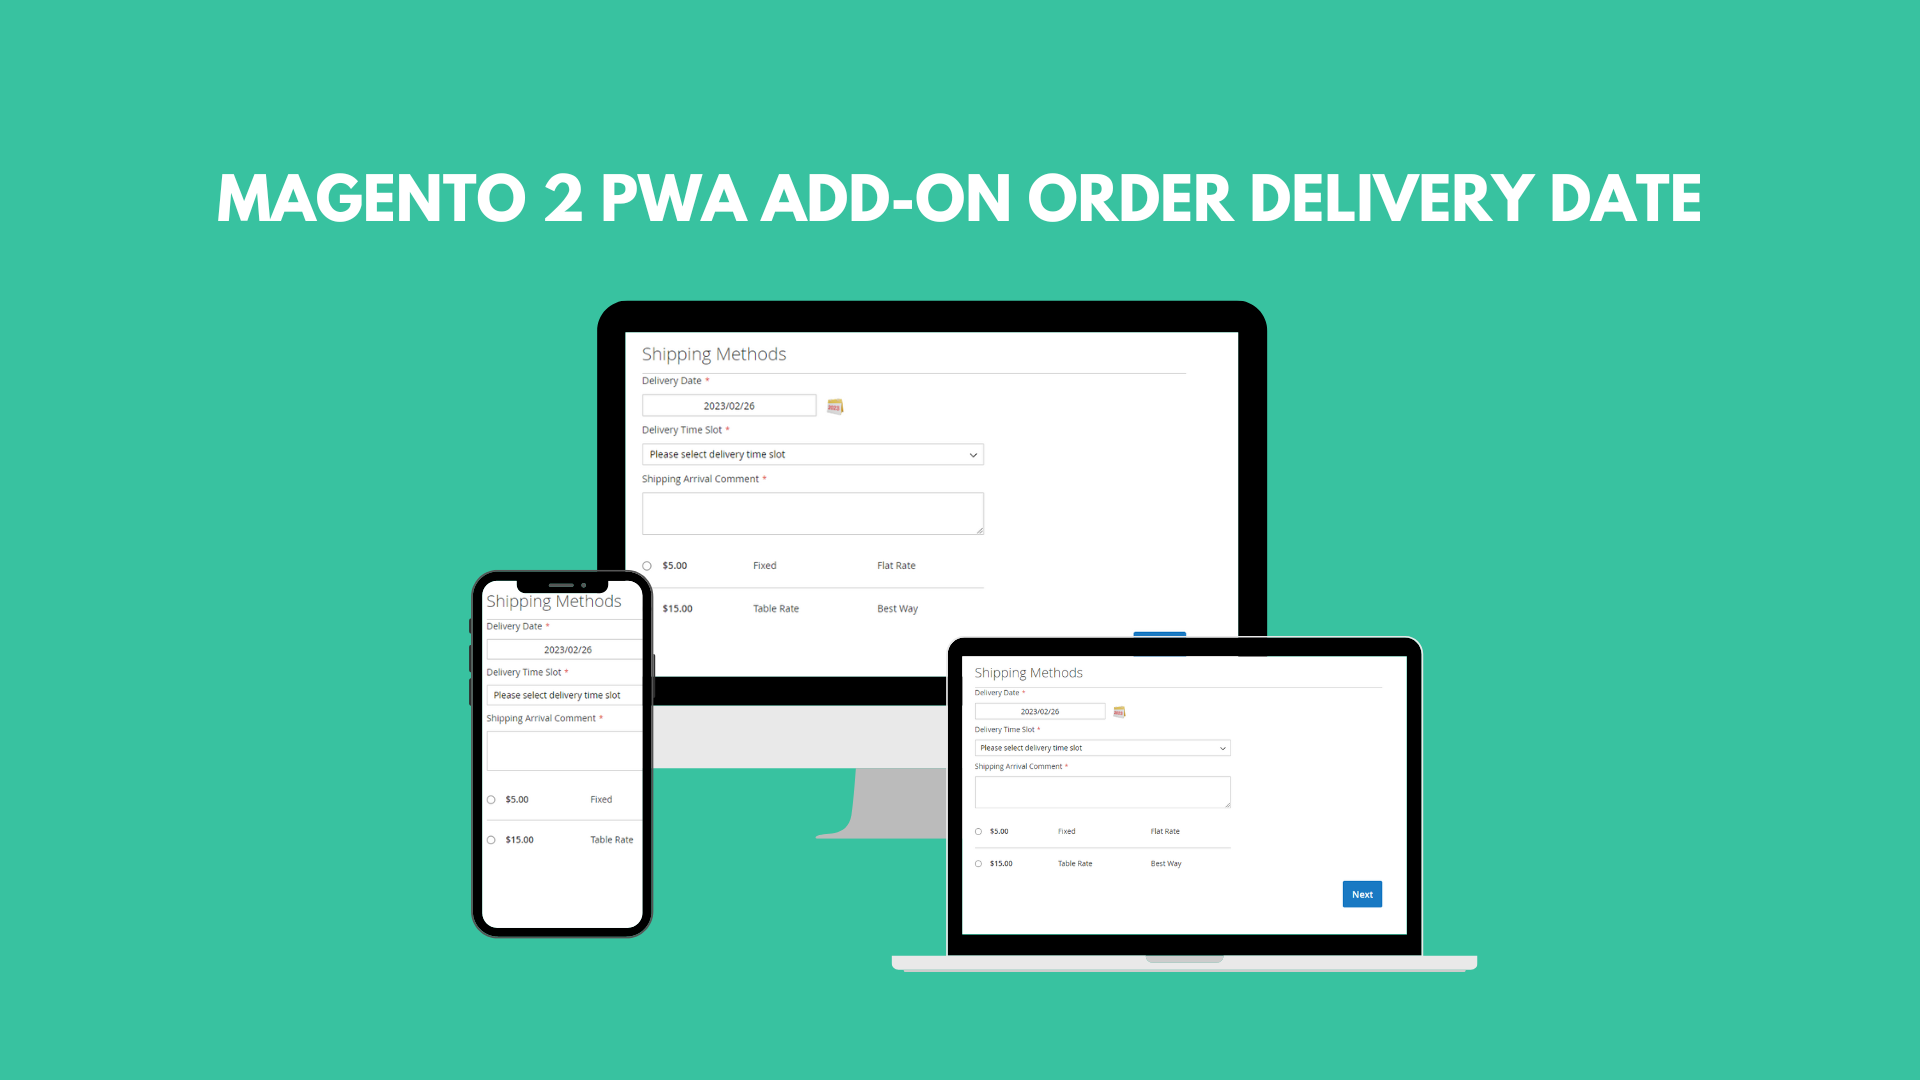 Magento 2 PWA Add-on Order Delivery Date